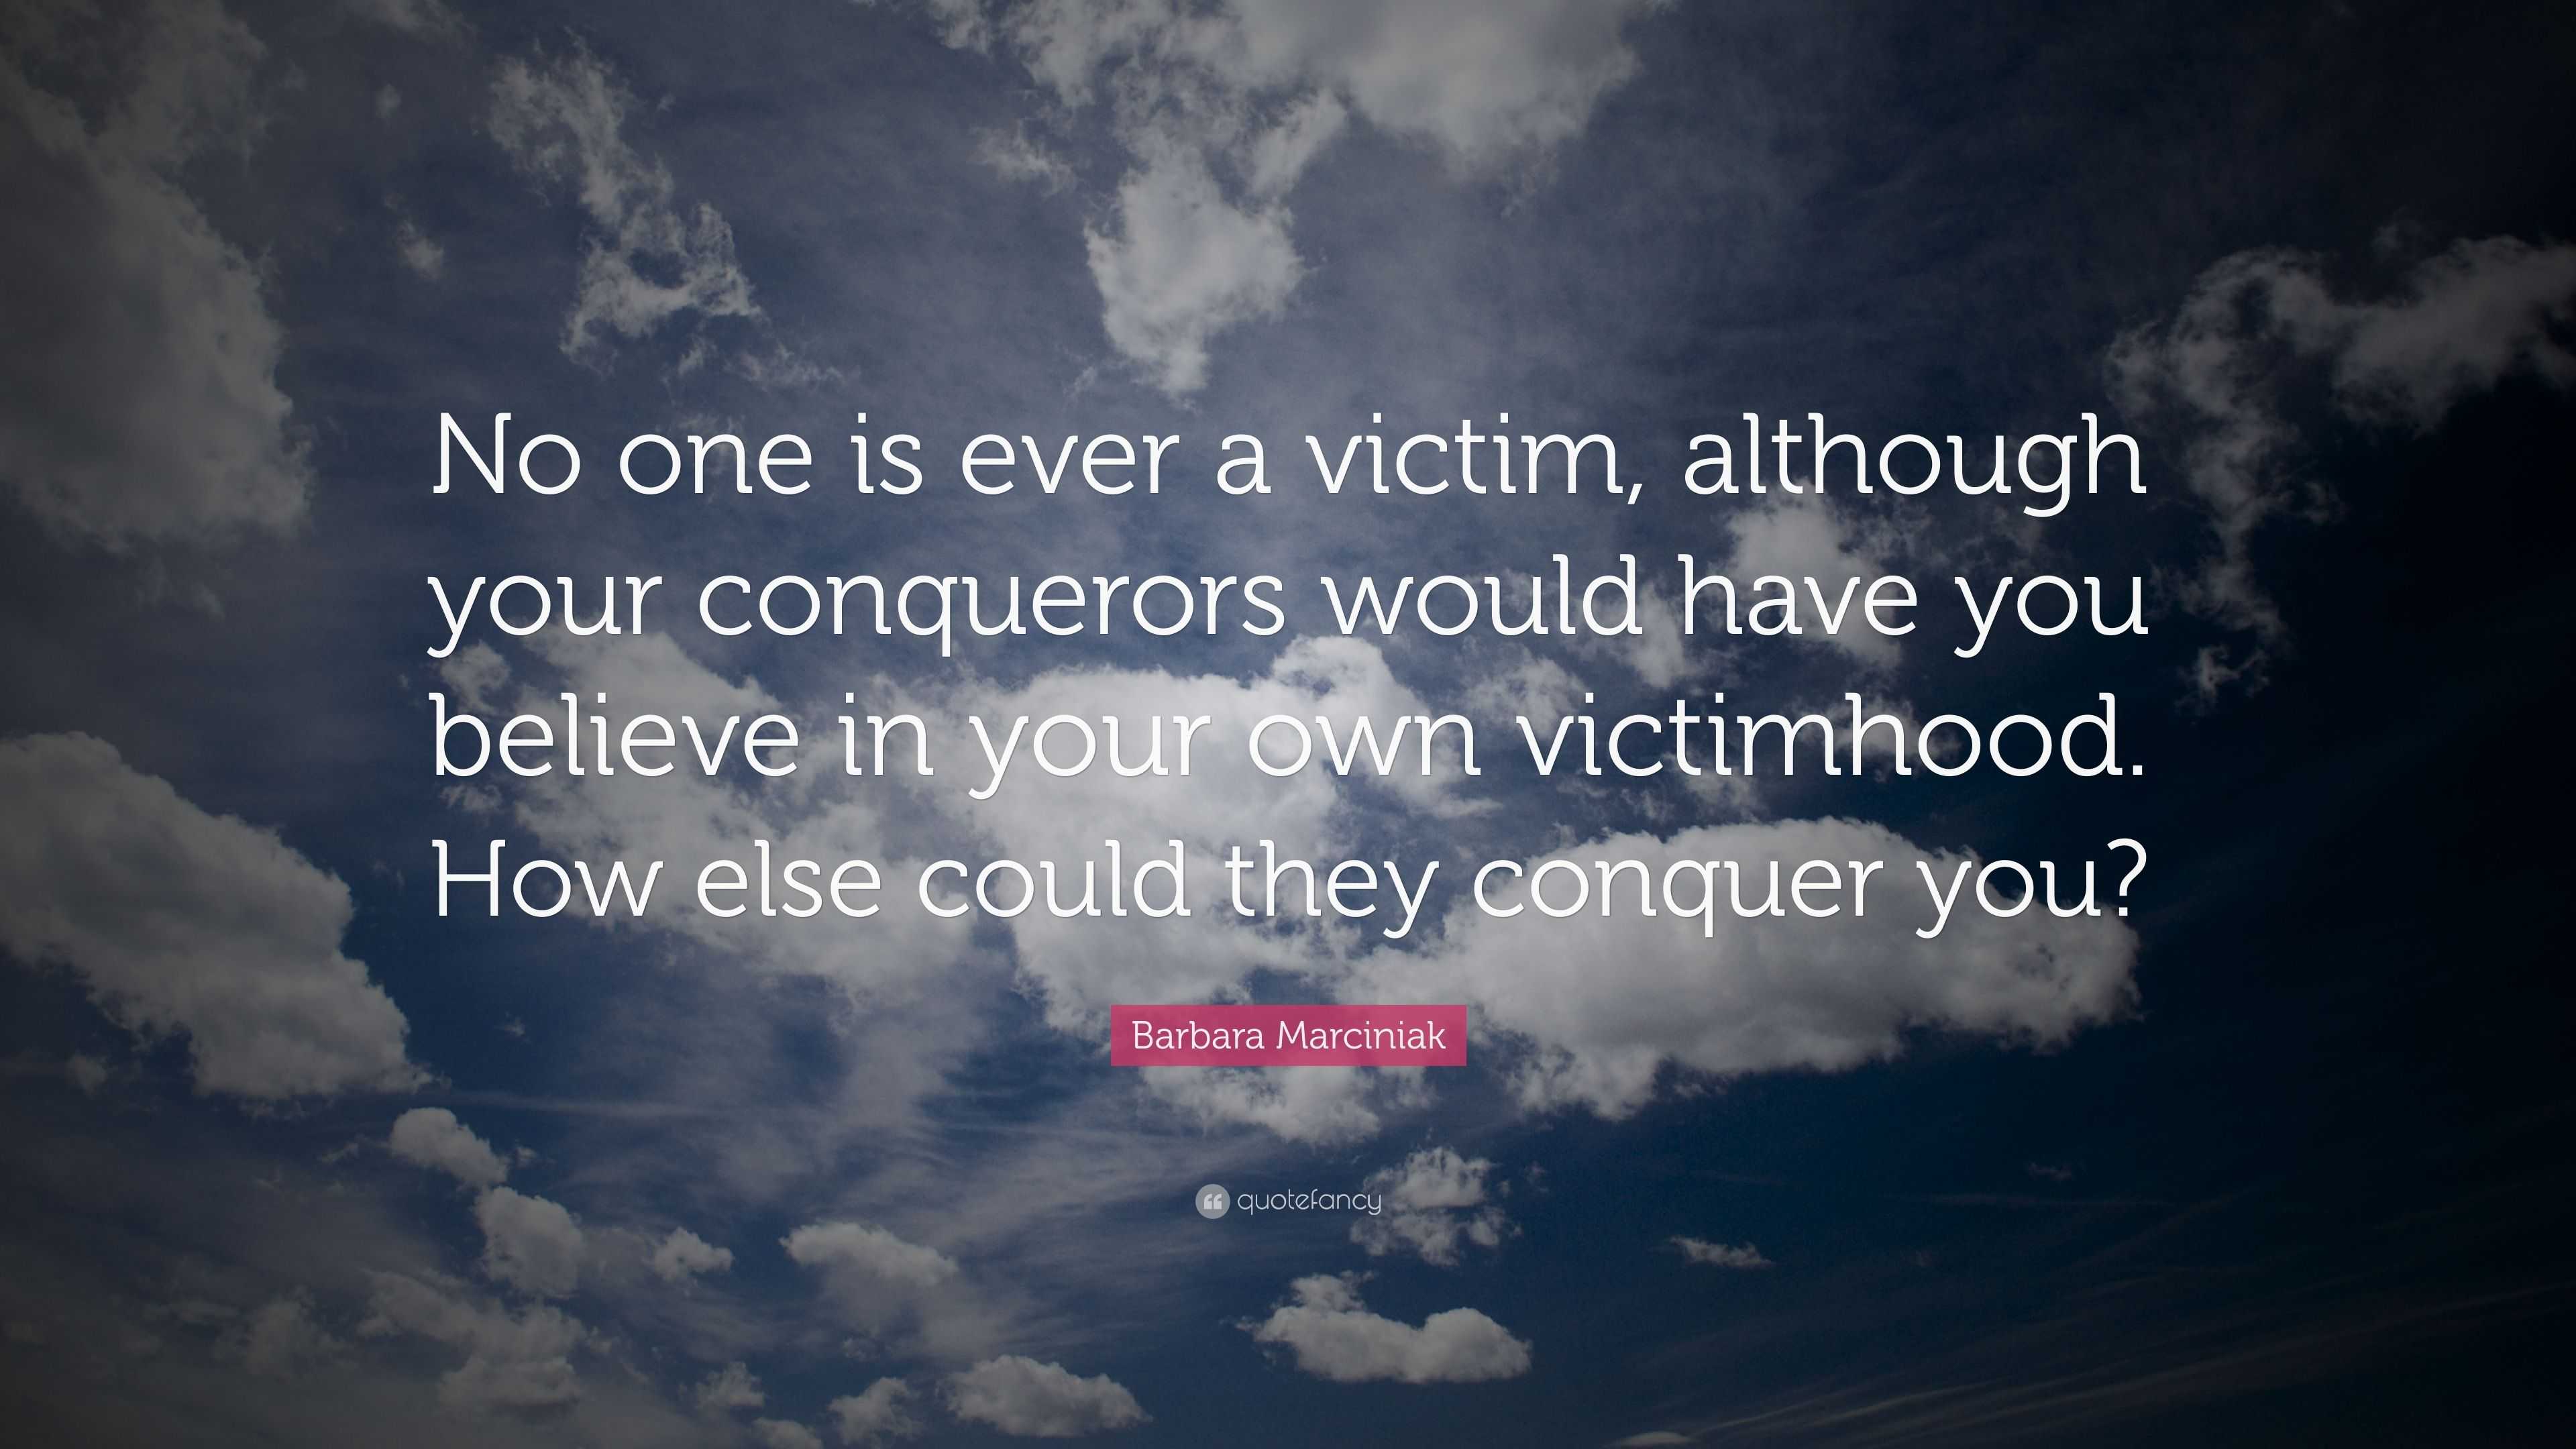 Barbara Marciniak Quote: “No one is ever a victim, although your